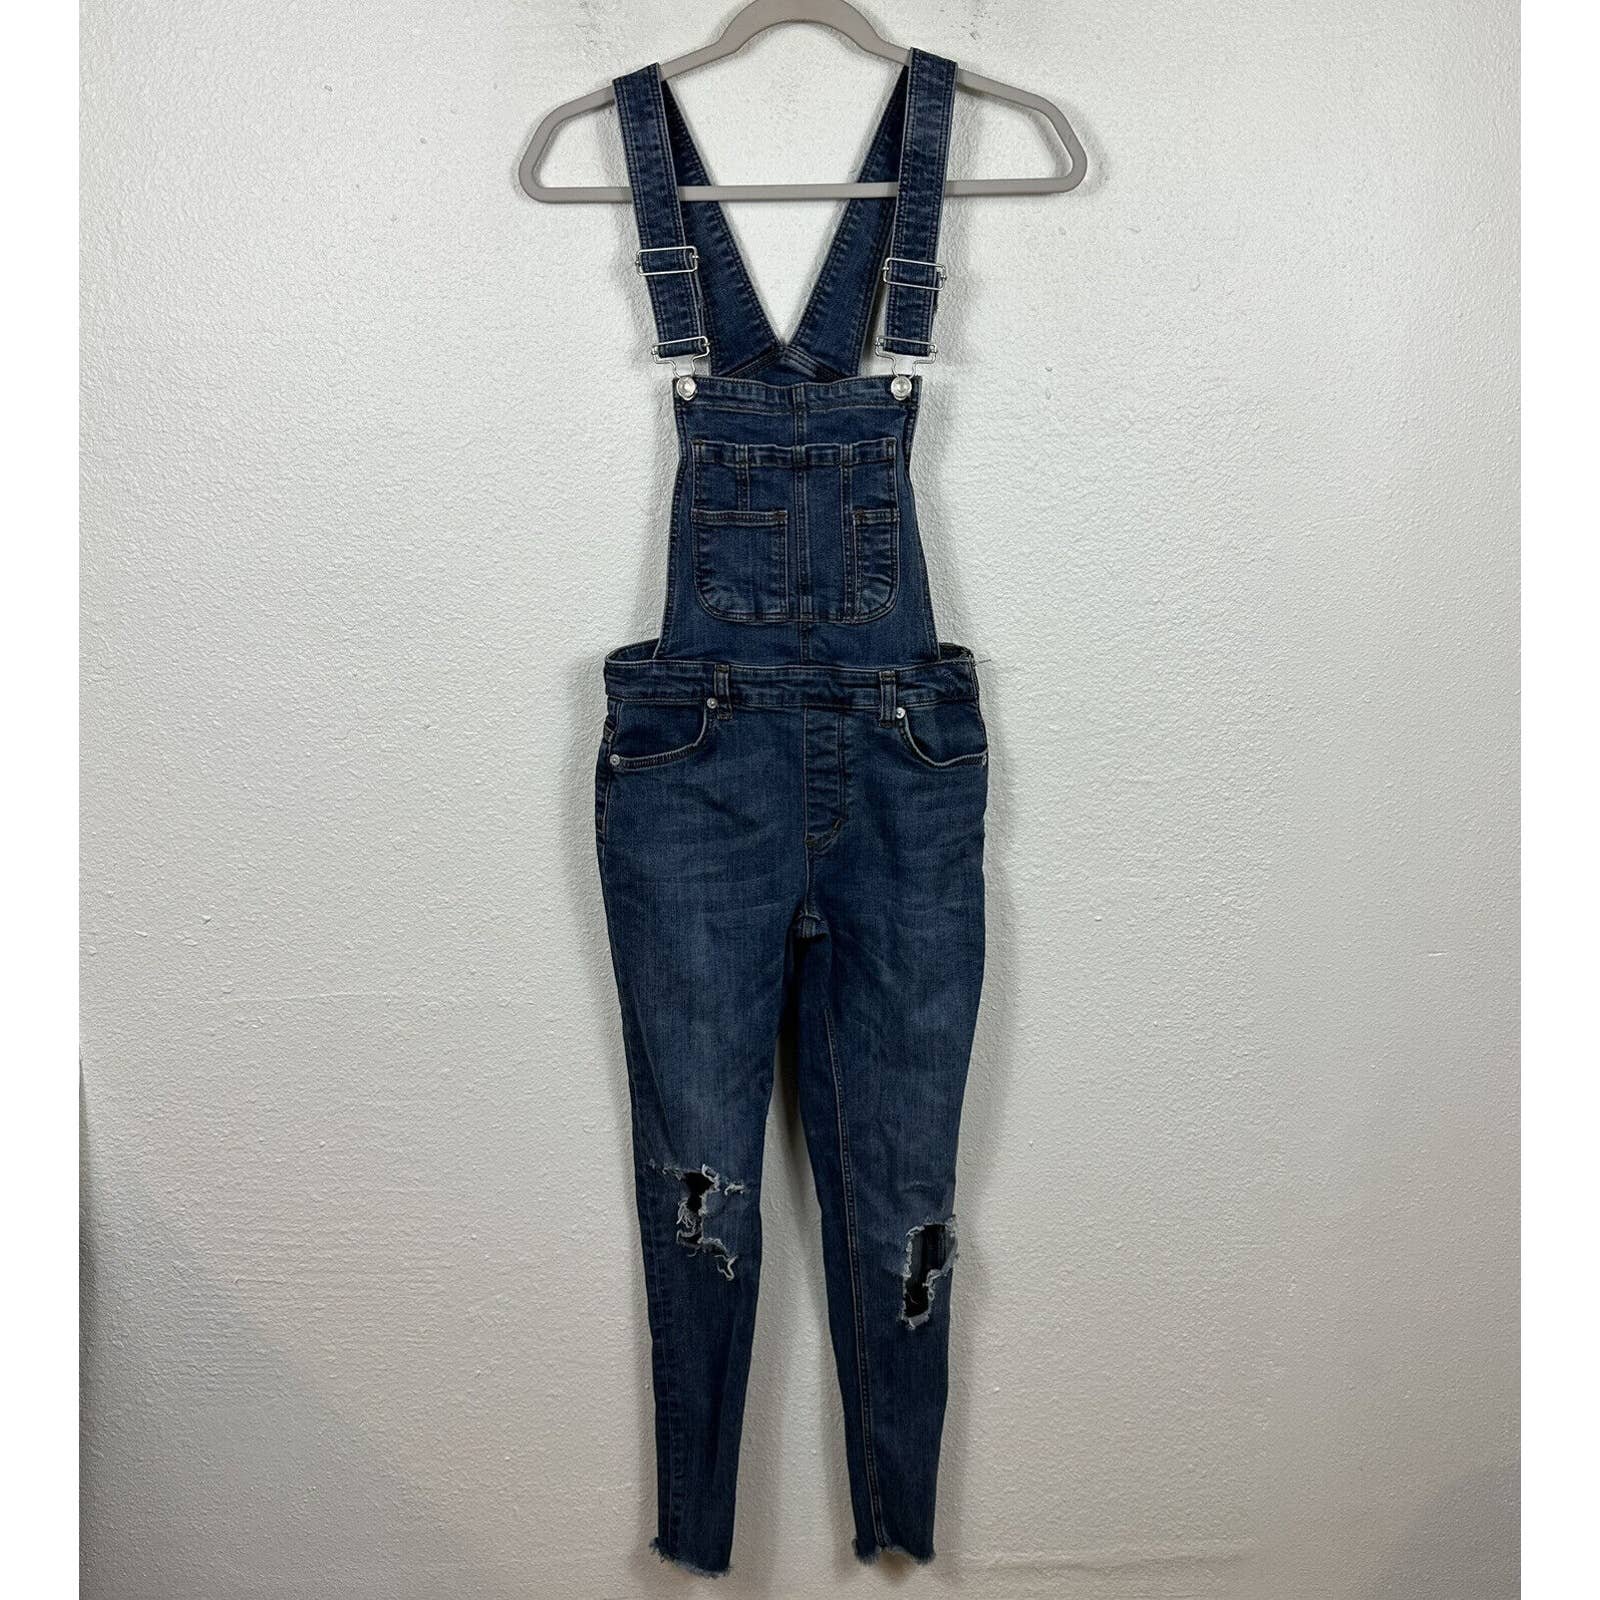 Discounted Free People Size 26 Lexden Classic Fitted Denim Overalls Distressed Boho 90s Nc9QQpZKF best sale